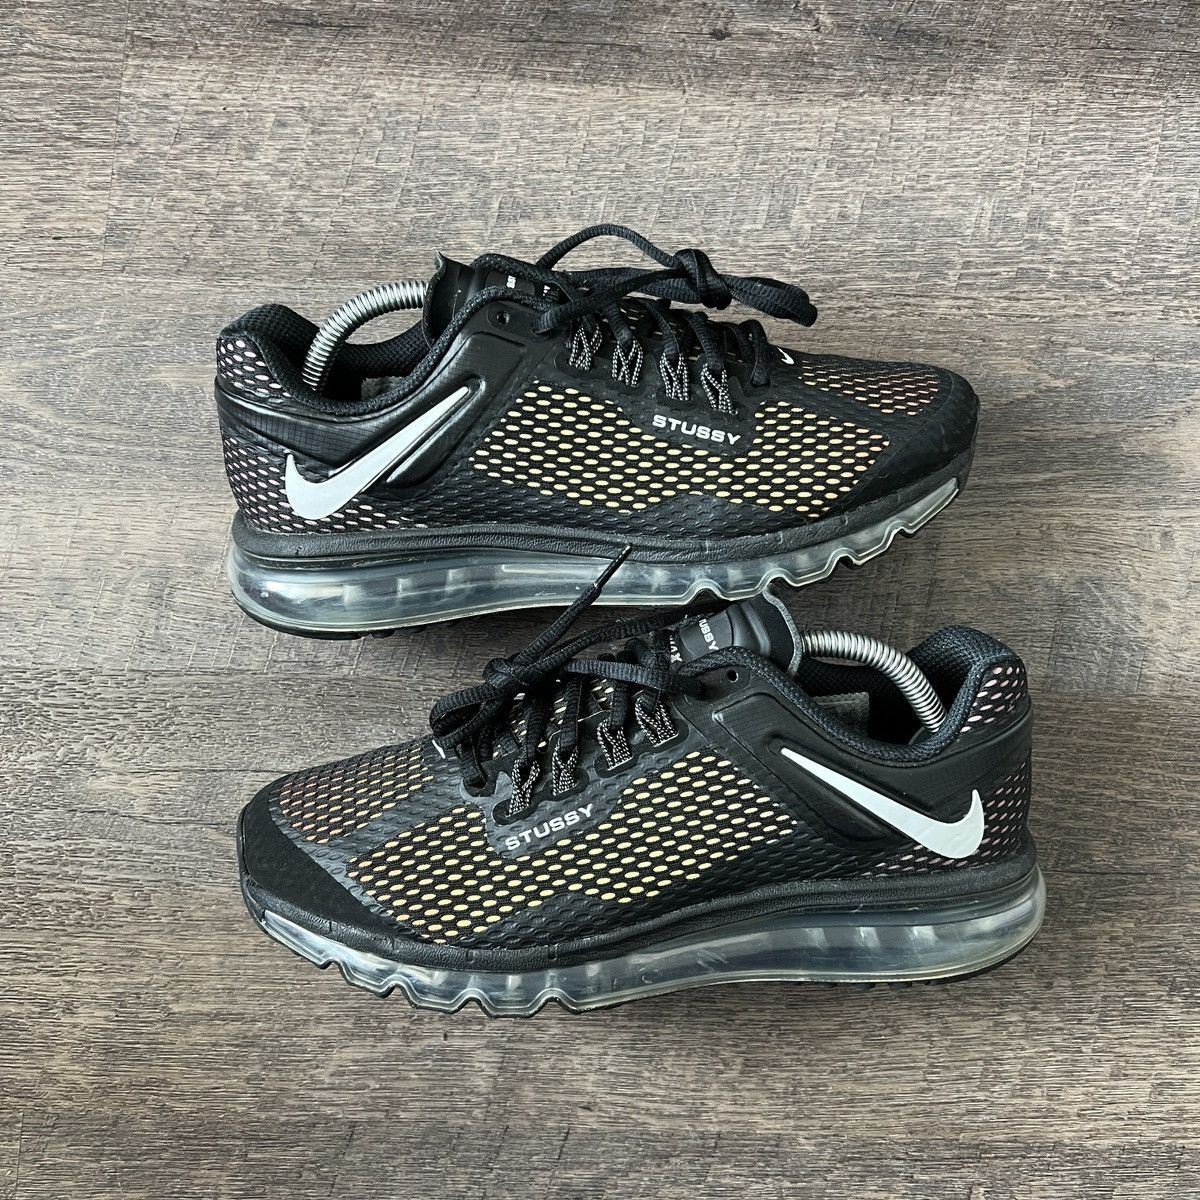 Pre-owned Nike X Stussy Air Max 2013 Shoes In Black